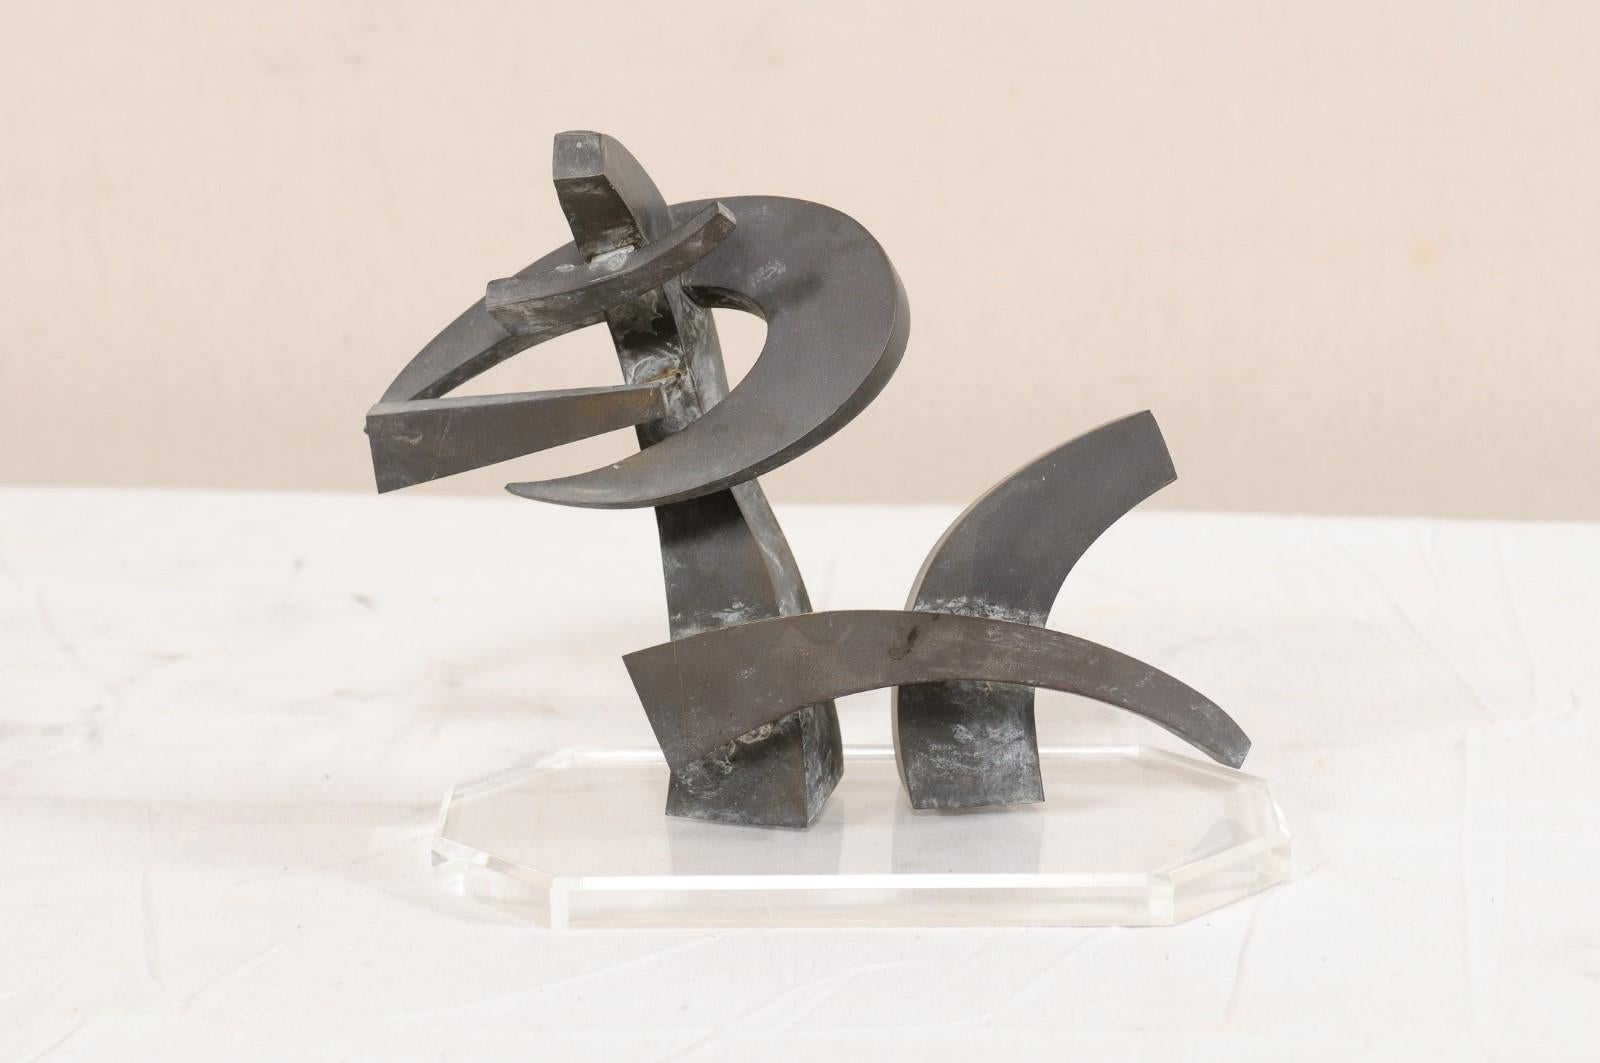 A European small-sized abstract sculpture from the mid-20th century. This vintage European abstract art piece has been created in bronze, and has a wonderful dark patina. It has been custom mounted on a clear, Lucite base. This midcentury art